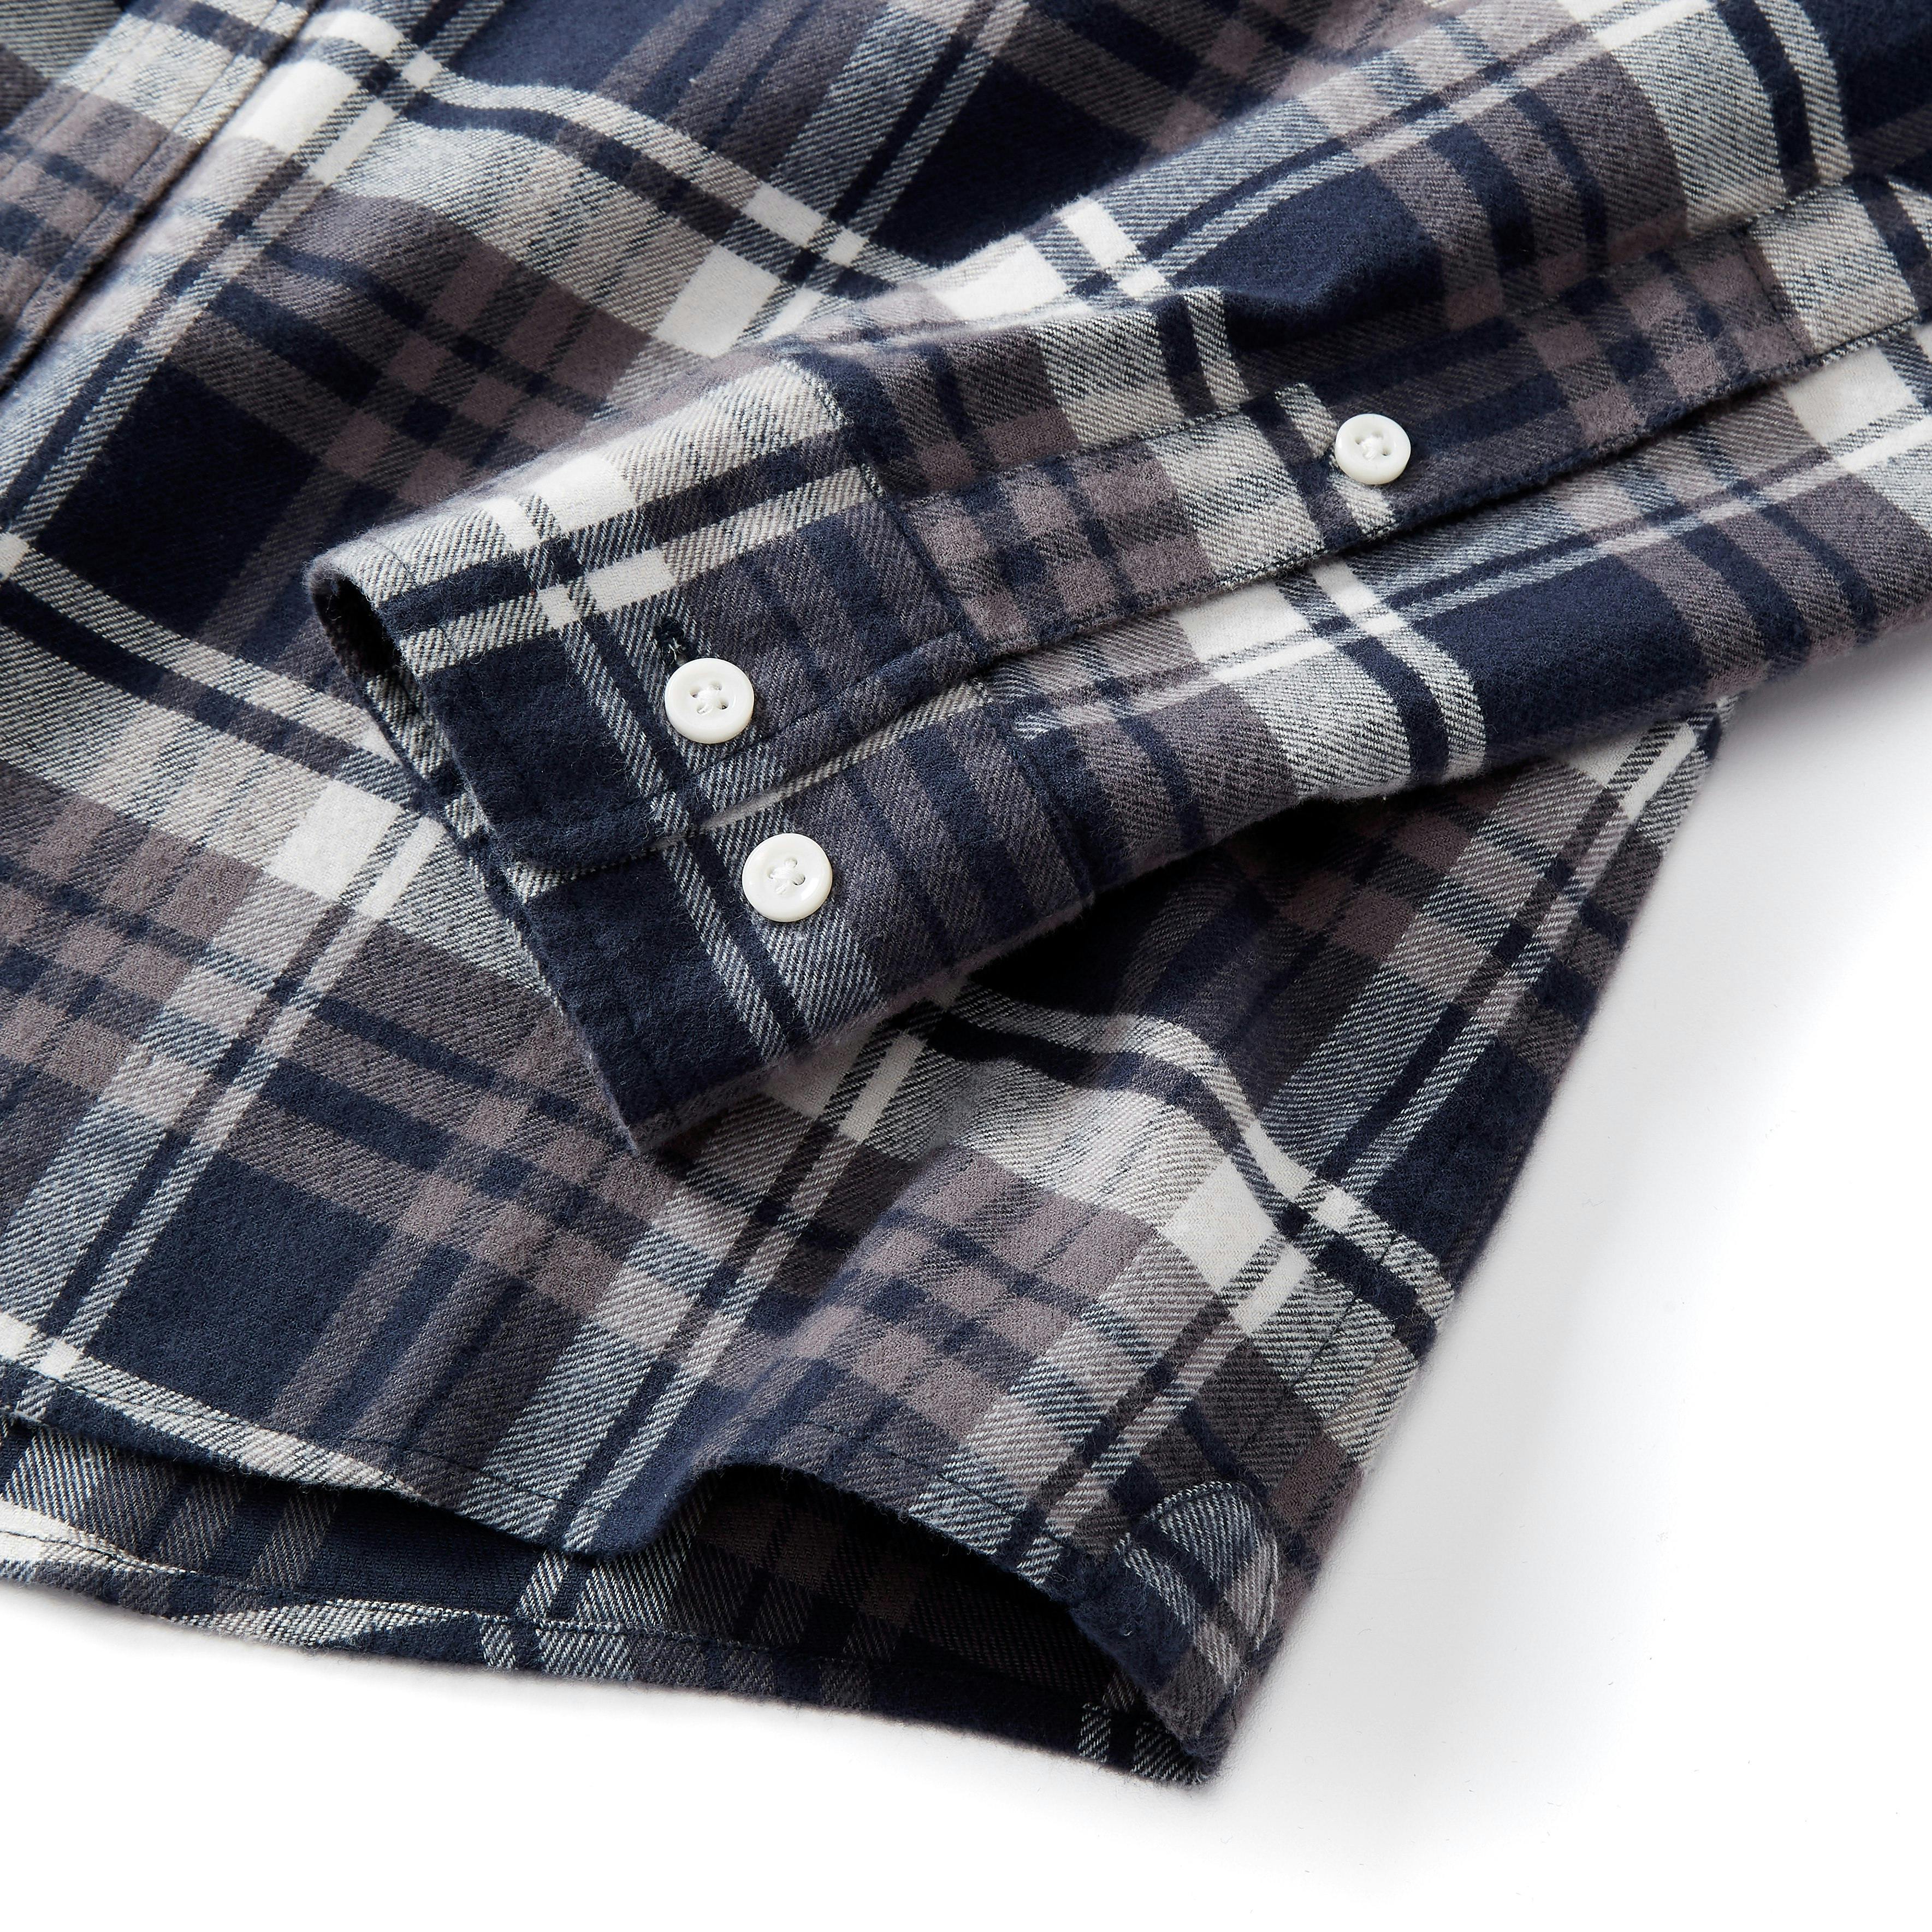 Proof Stretch Flannel